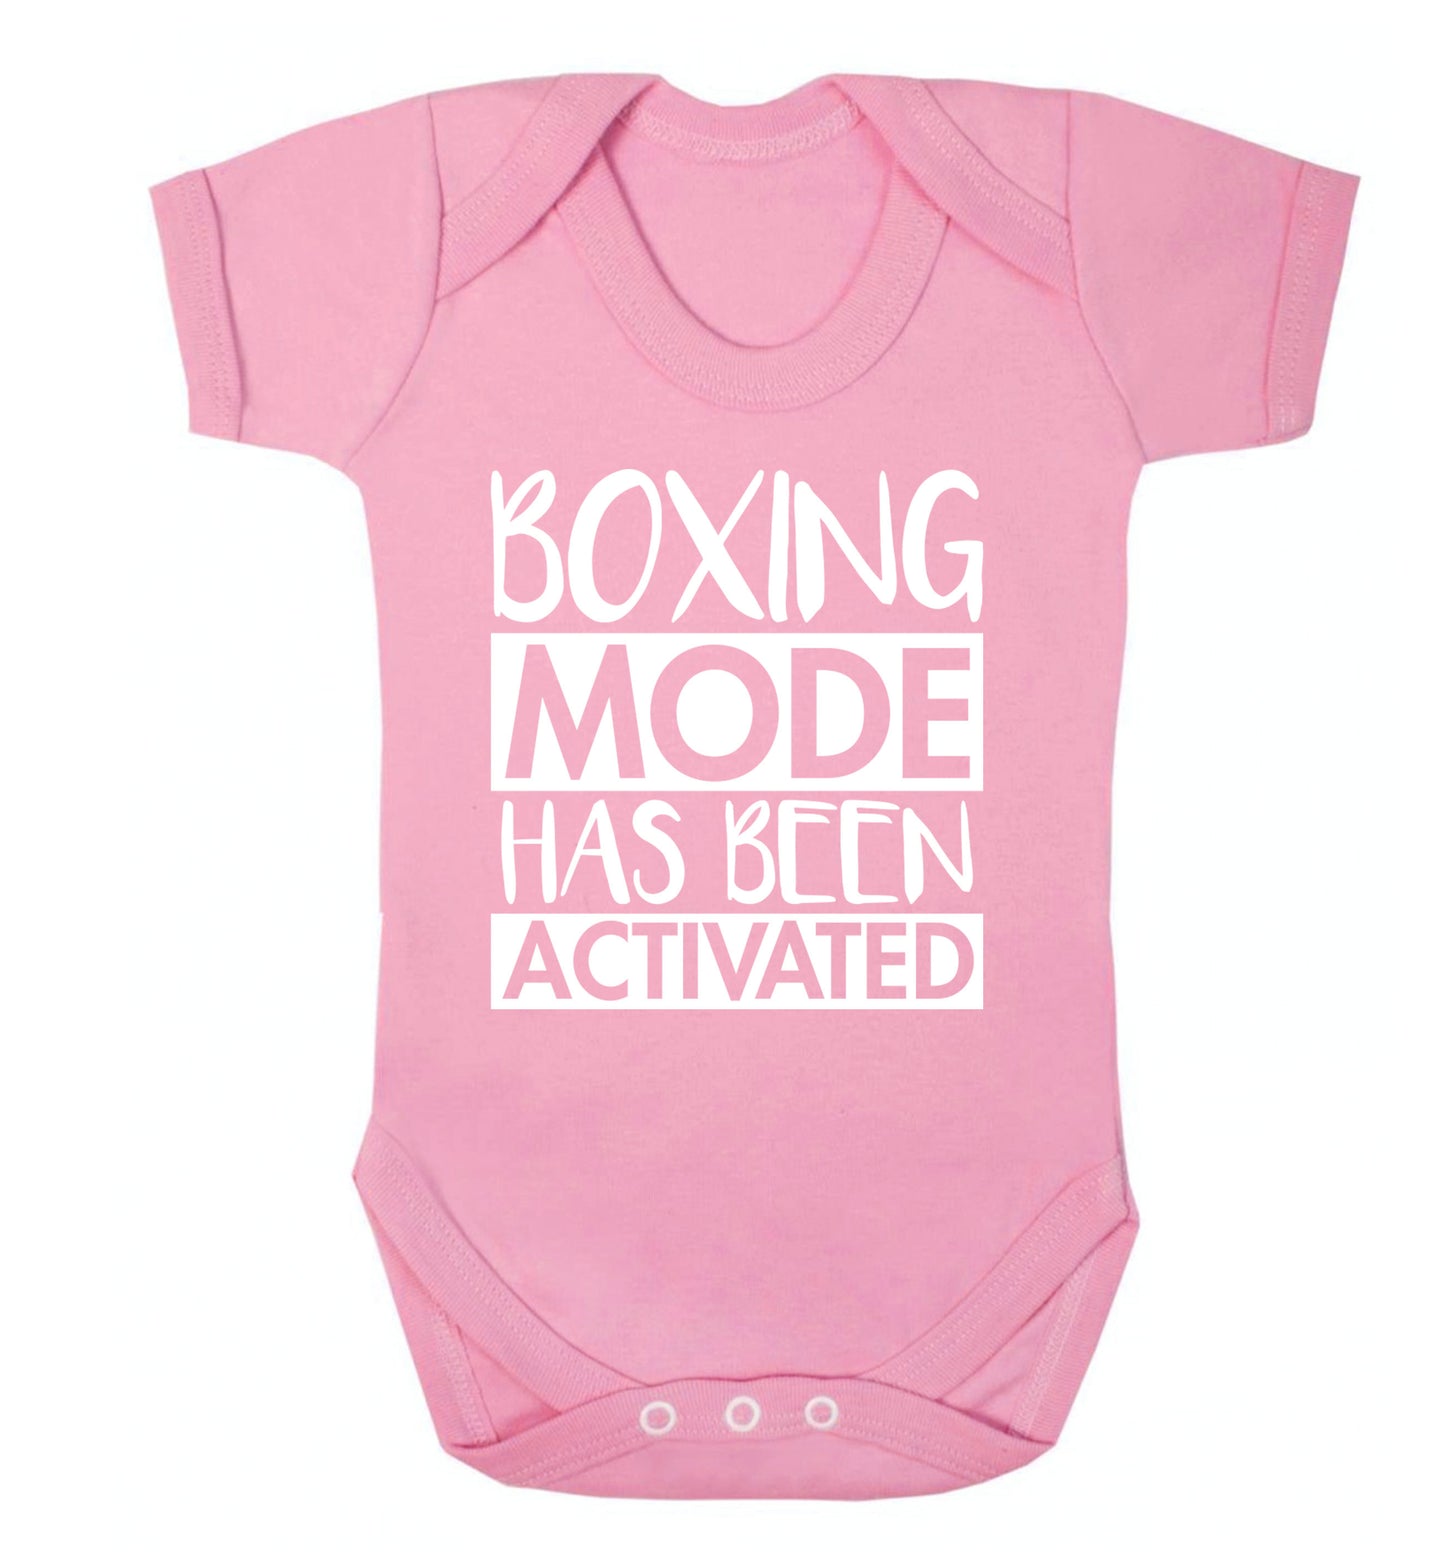 Boxing mode activated Baby Vest pale pink 18-24 months